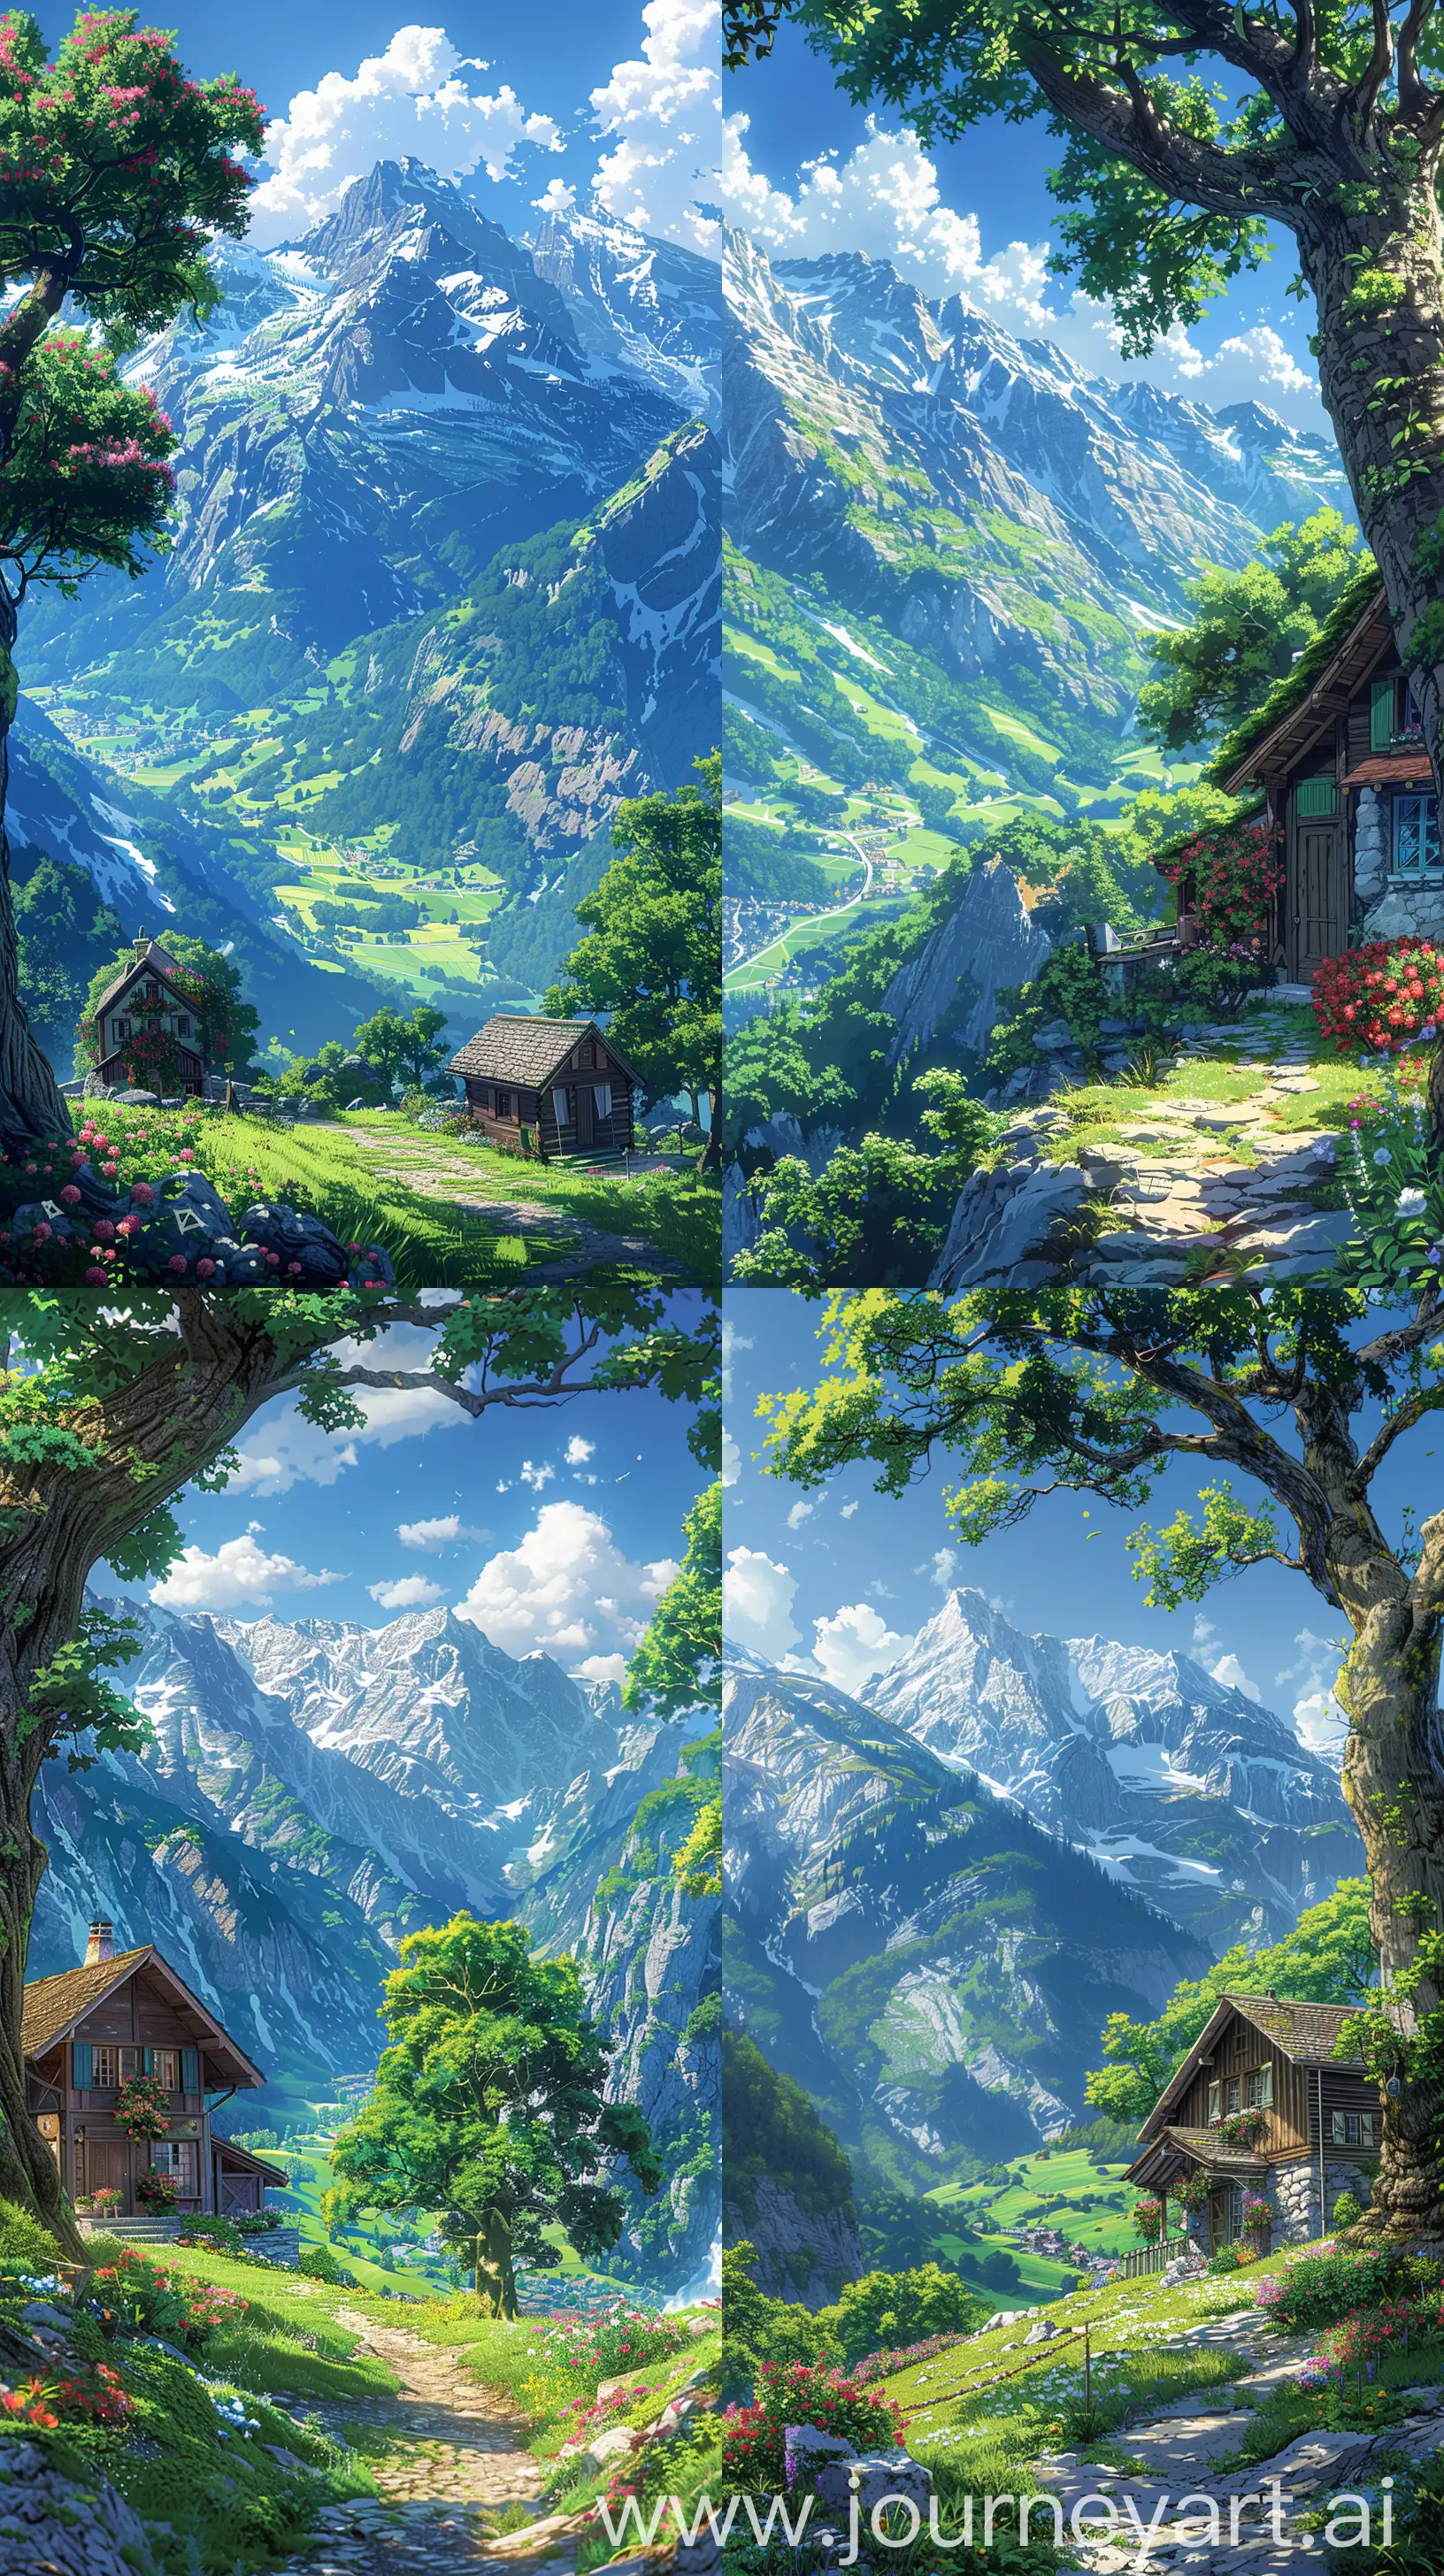 Beautiful-Anime-Cottage-Illustration-Swiss-Mountain-Scenery-with-Flower-Decorations